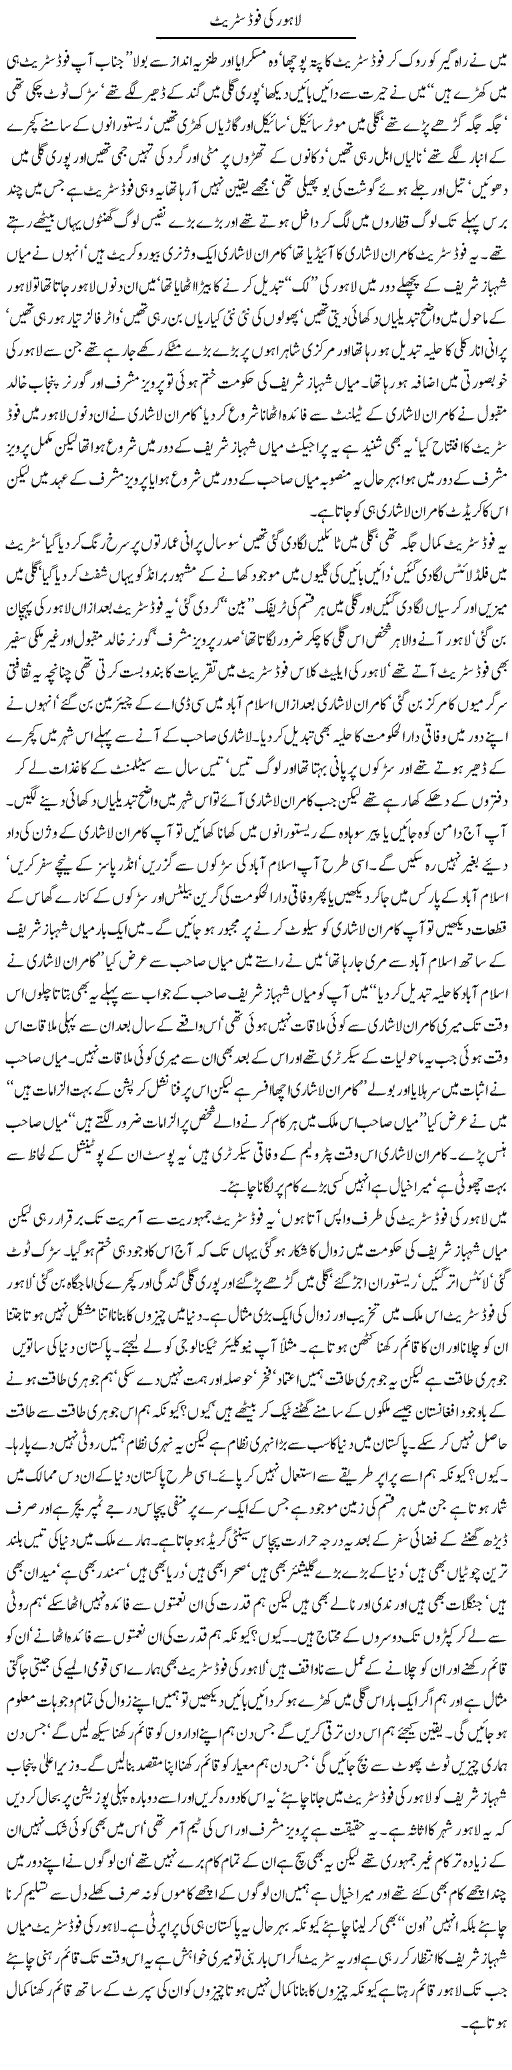 Lahore food street Express Column Javed Chaudhary 9 March 2010